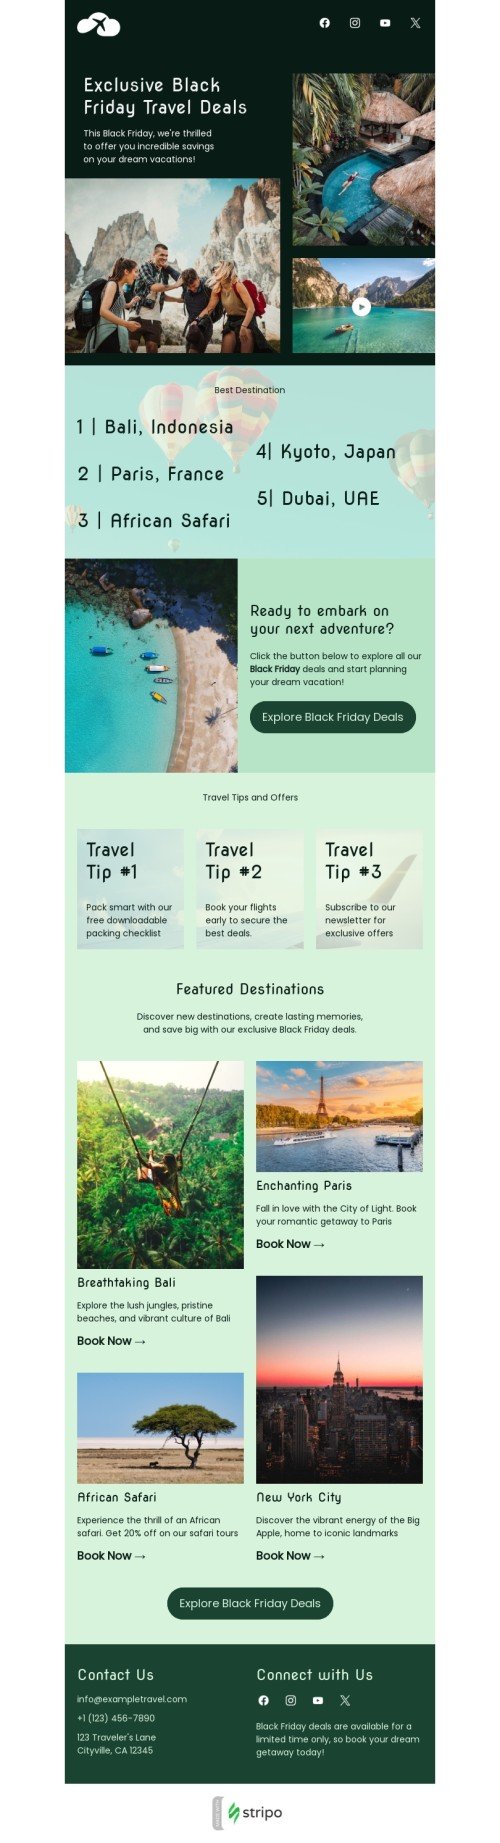 Black Friday email template "Black Friday travel deals" for travel industry desktop view